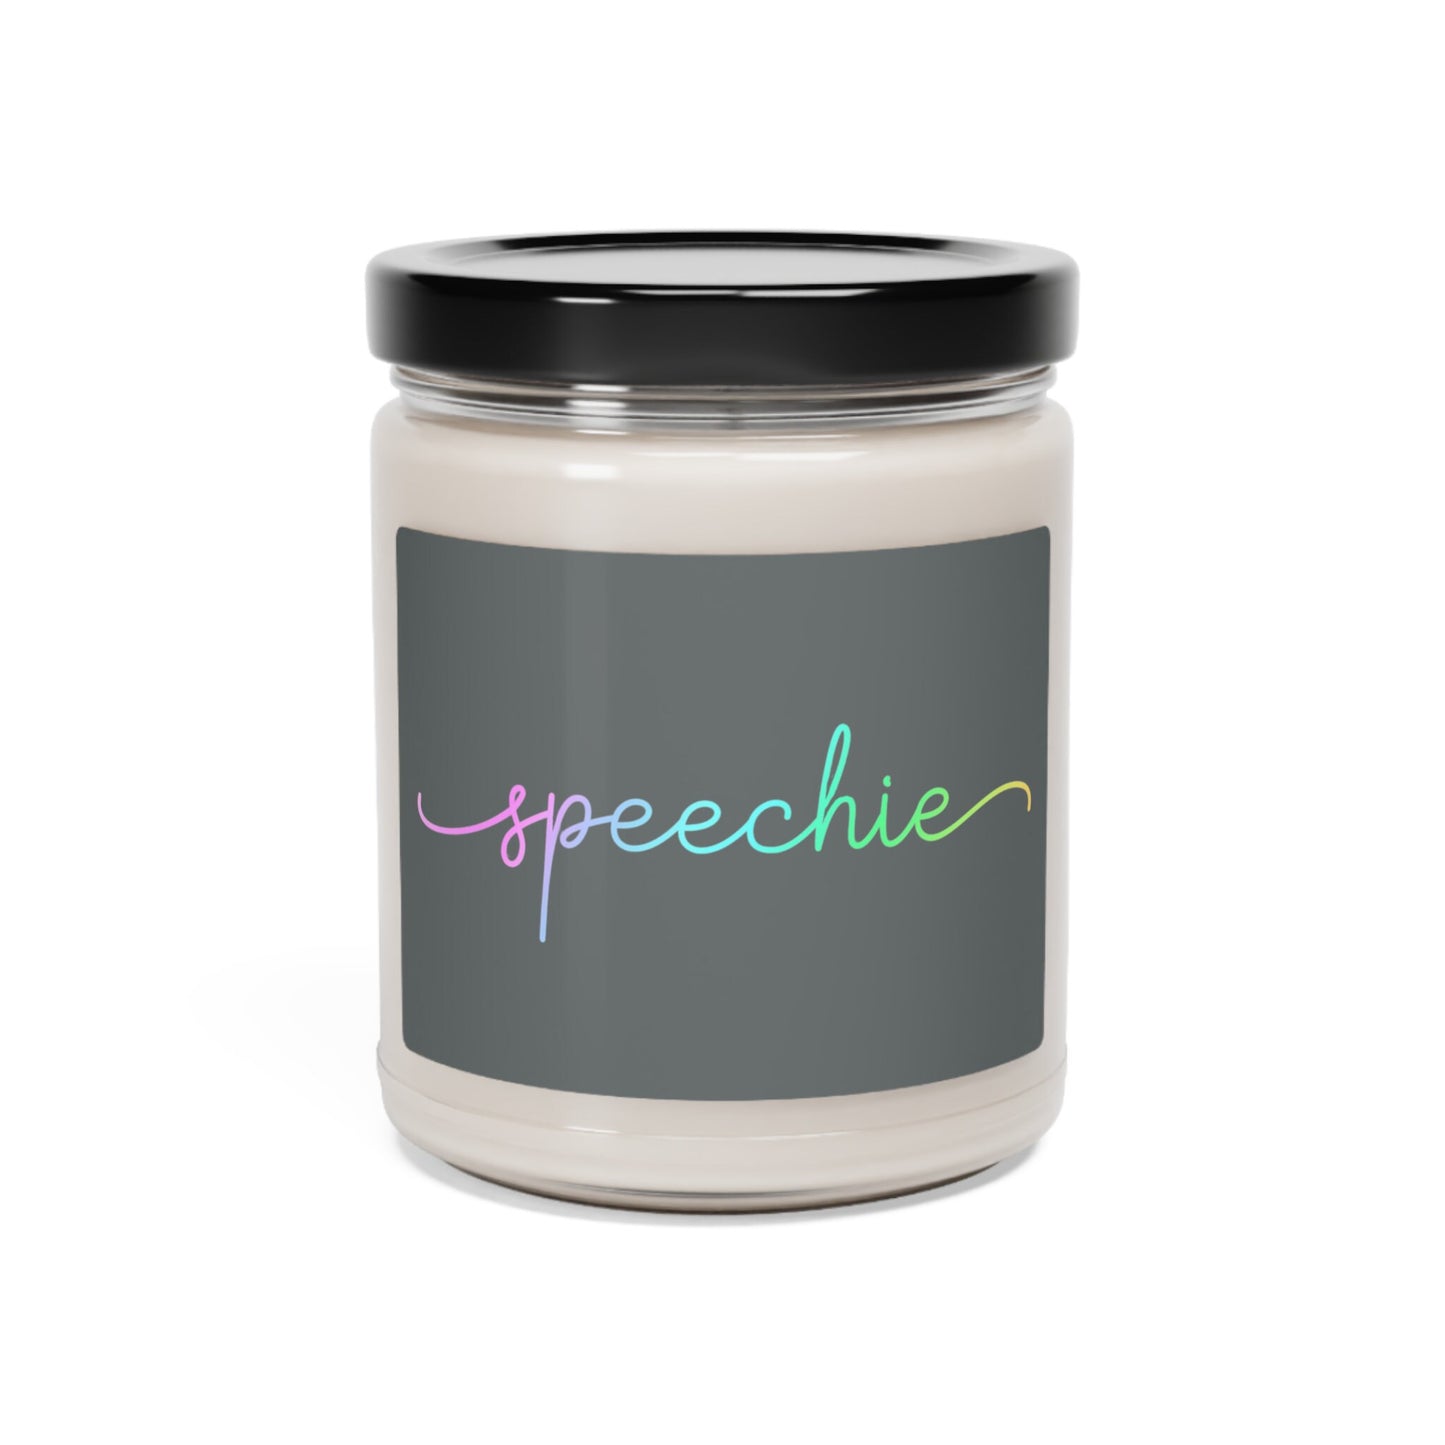 Speechie Minimalist Scented Soy Candle, 9 oz